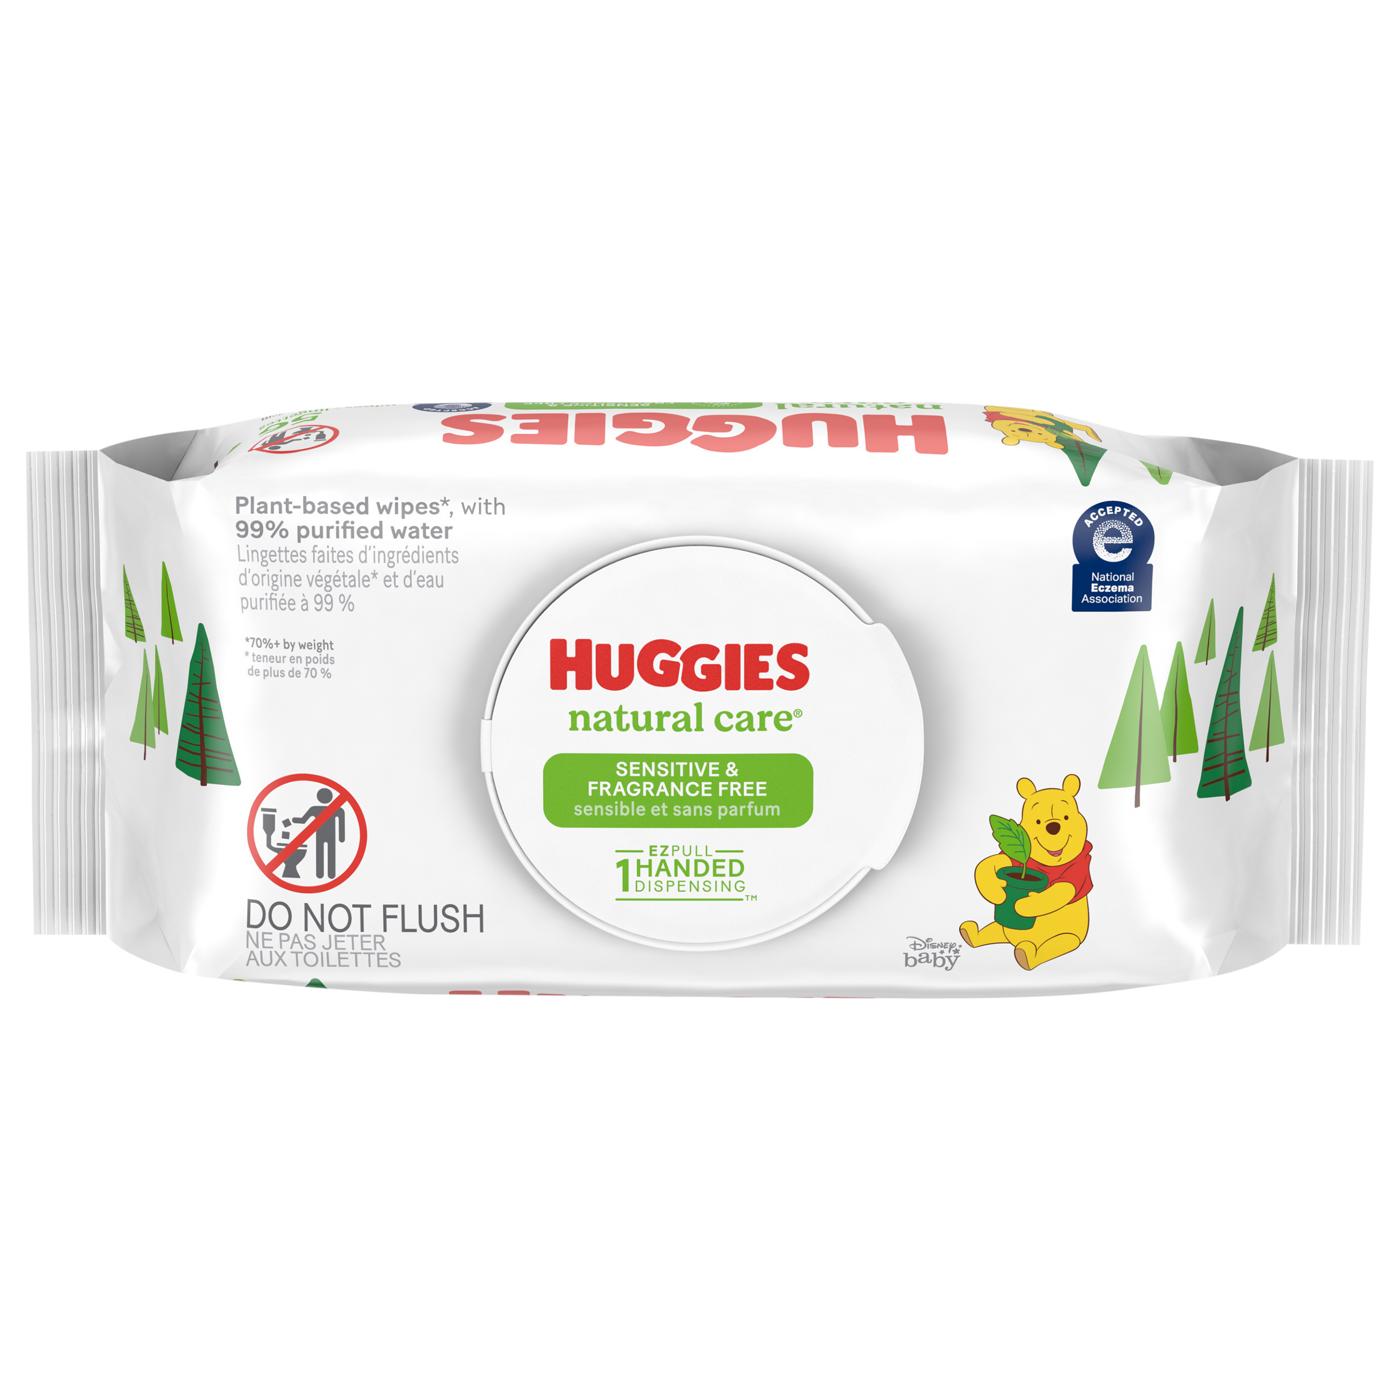 Huggies Natural Care Sensitive Baby Wipes - Fragrance Free; image 1 of 9